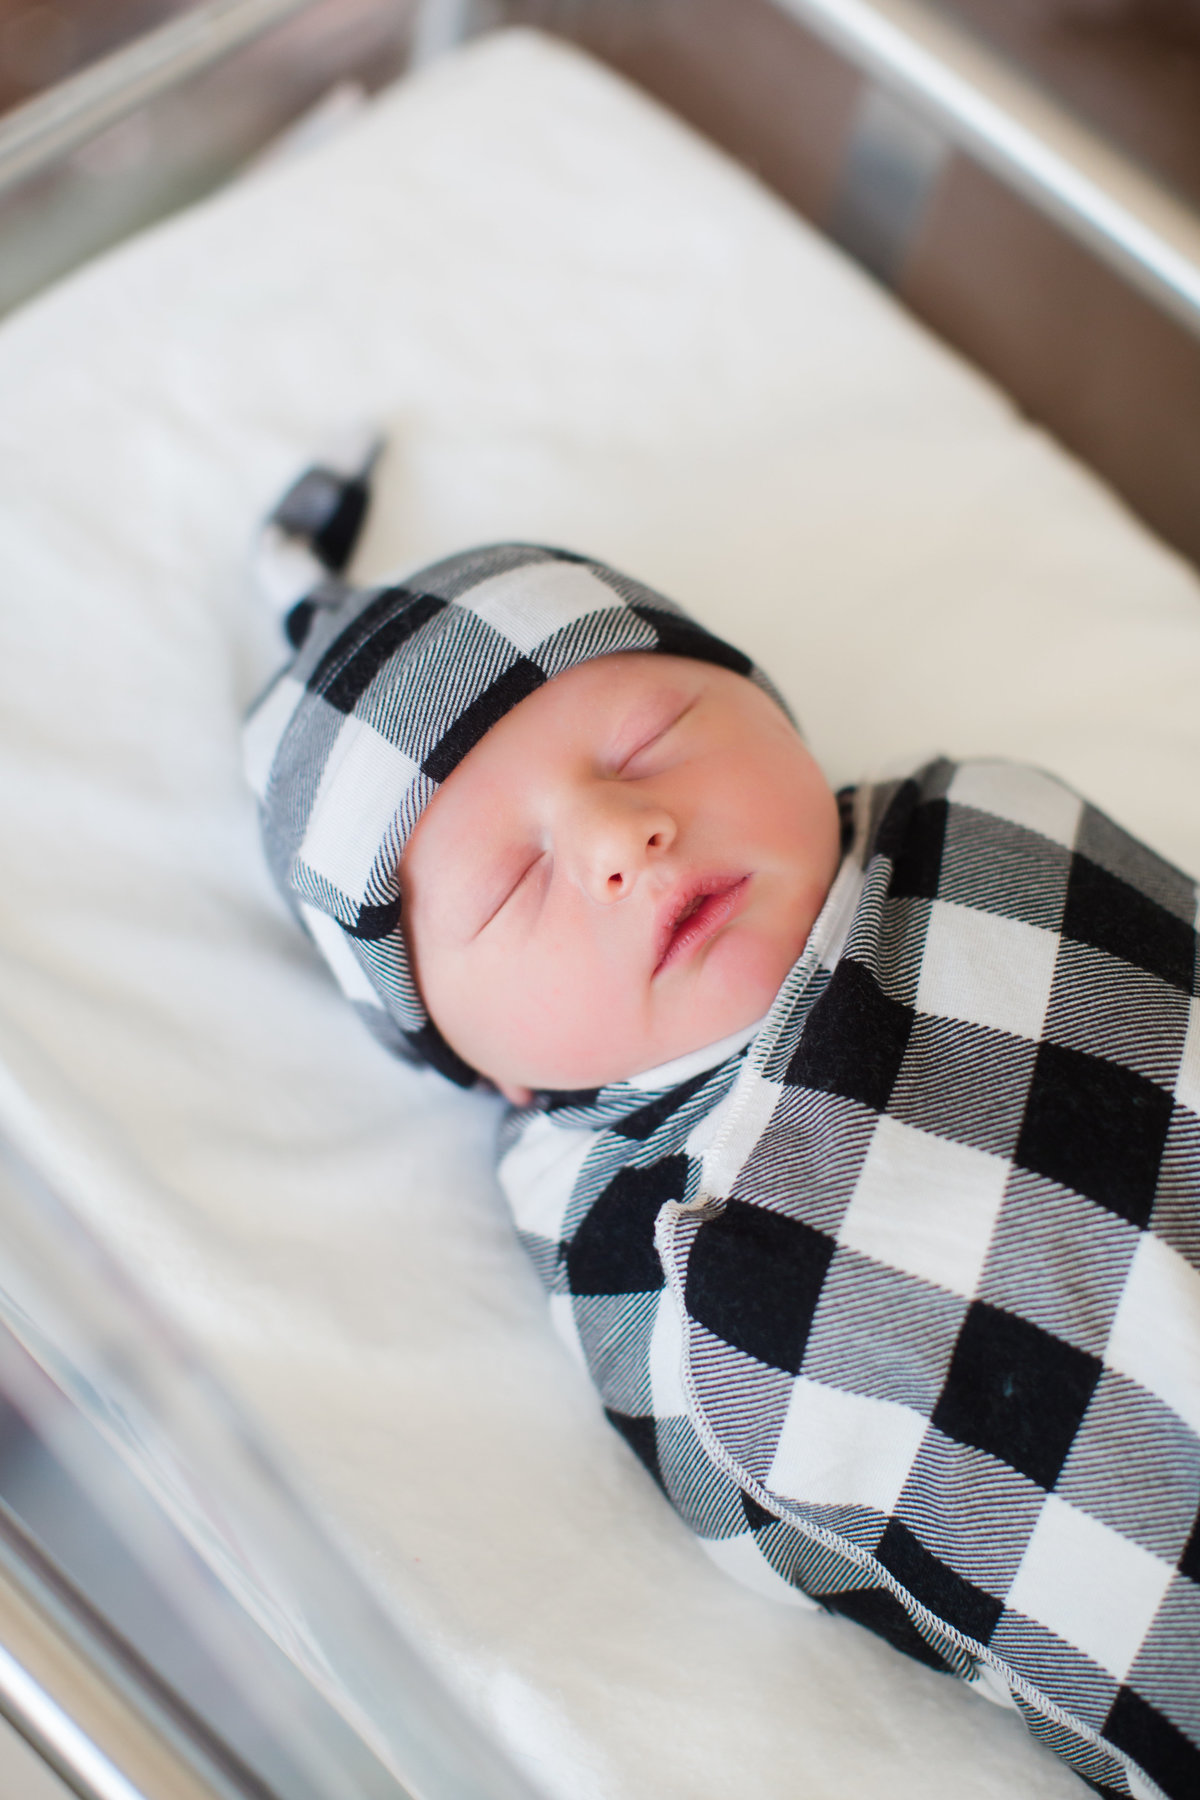 baby wrapped in black plaid swaddle at hospital for photos